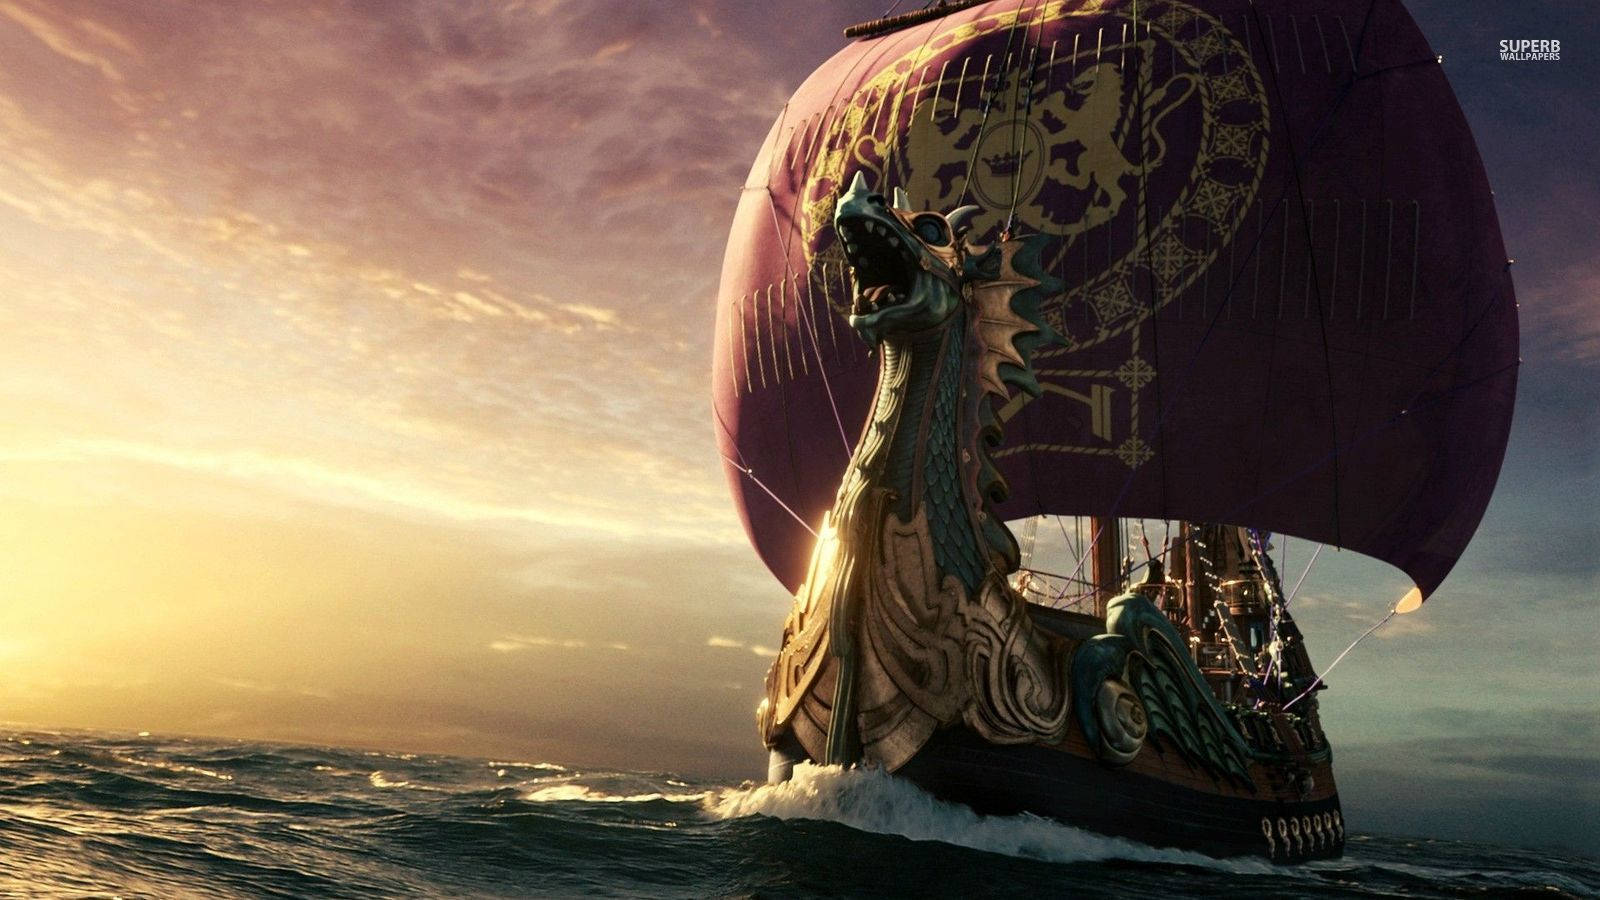 Image  Set Sail On A Dragon-Crested Pirate Ship Wallpaper